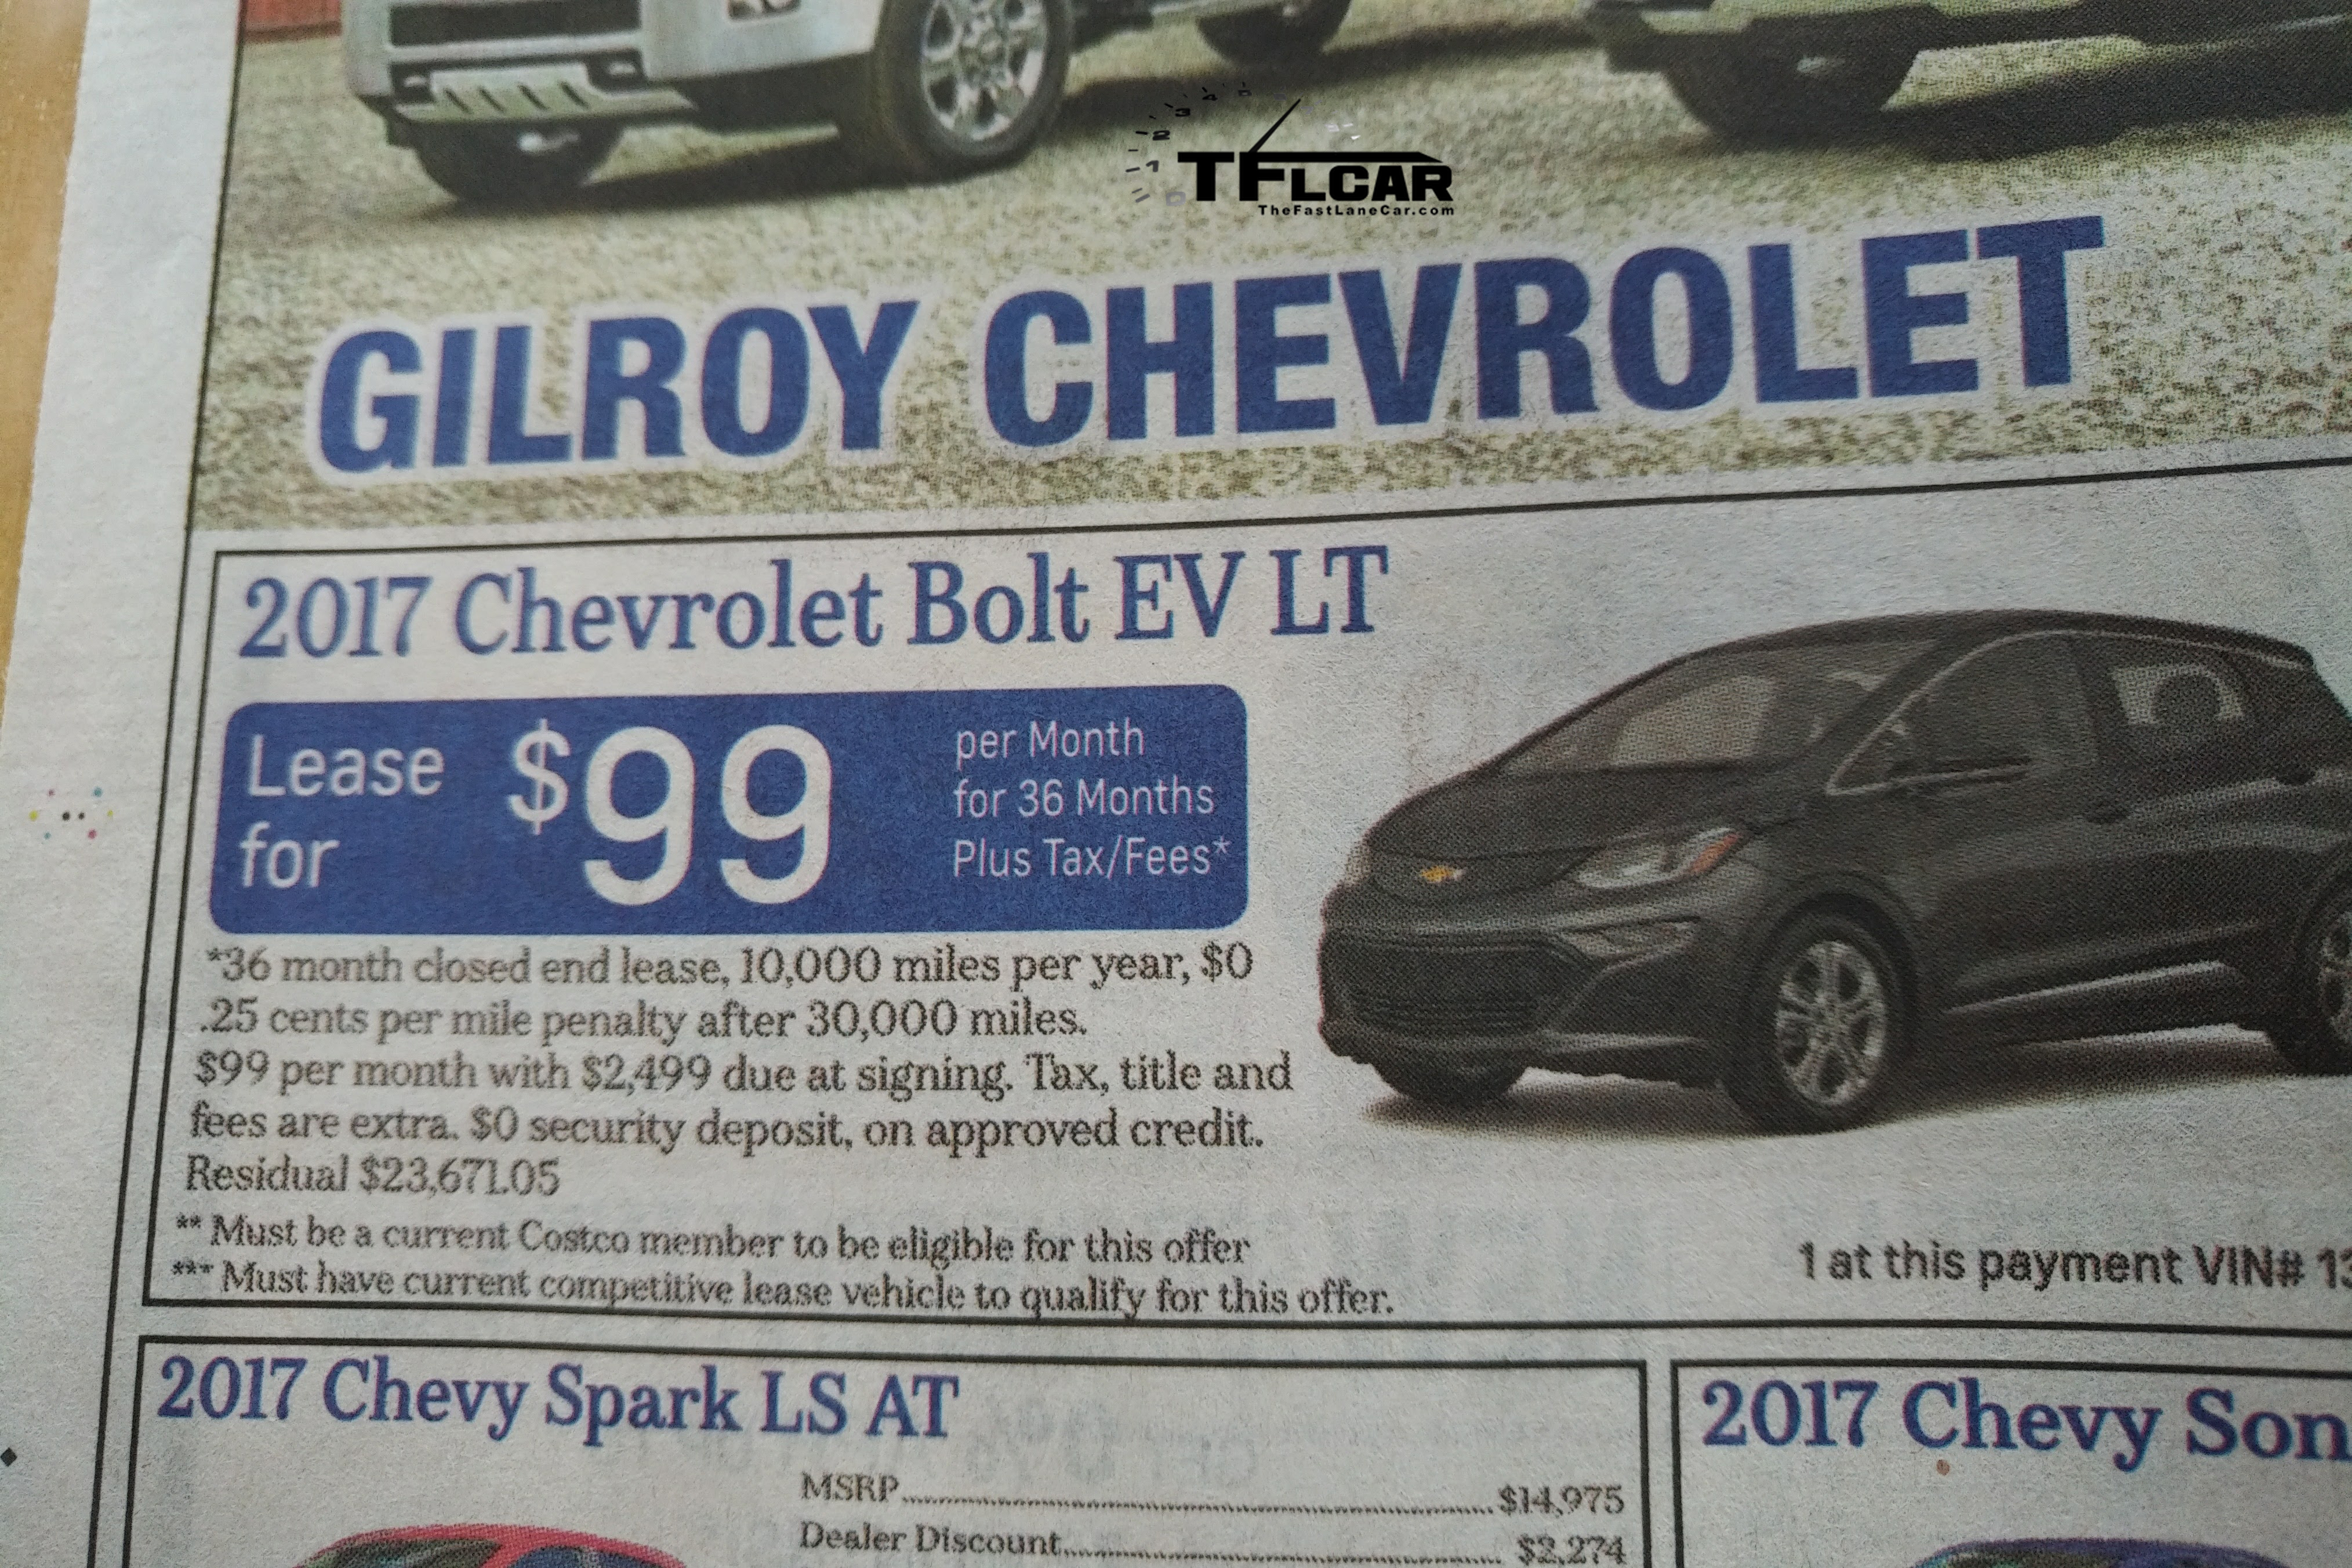 Why Are Chevy Dealers Offering 99 Month Leases On The Bolt